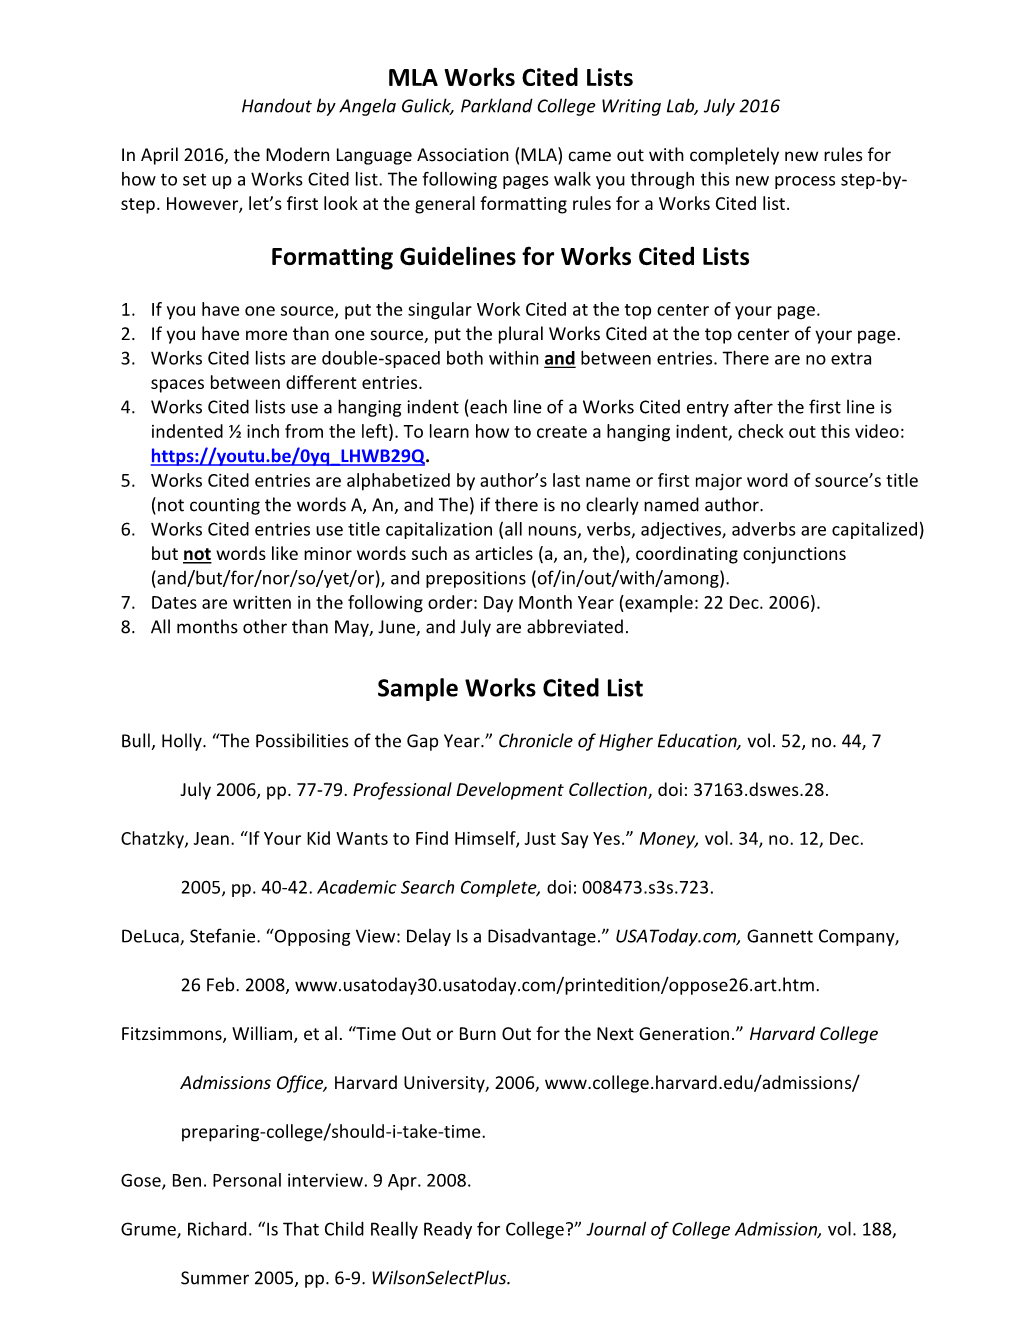 MLA Works Cited Lists Handout by Angela Gulick, Parkland College Writing Lab, July 2016